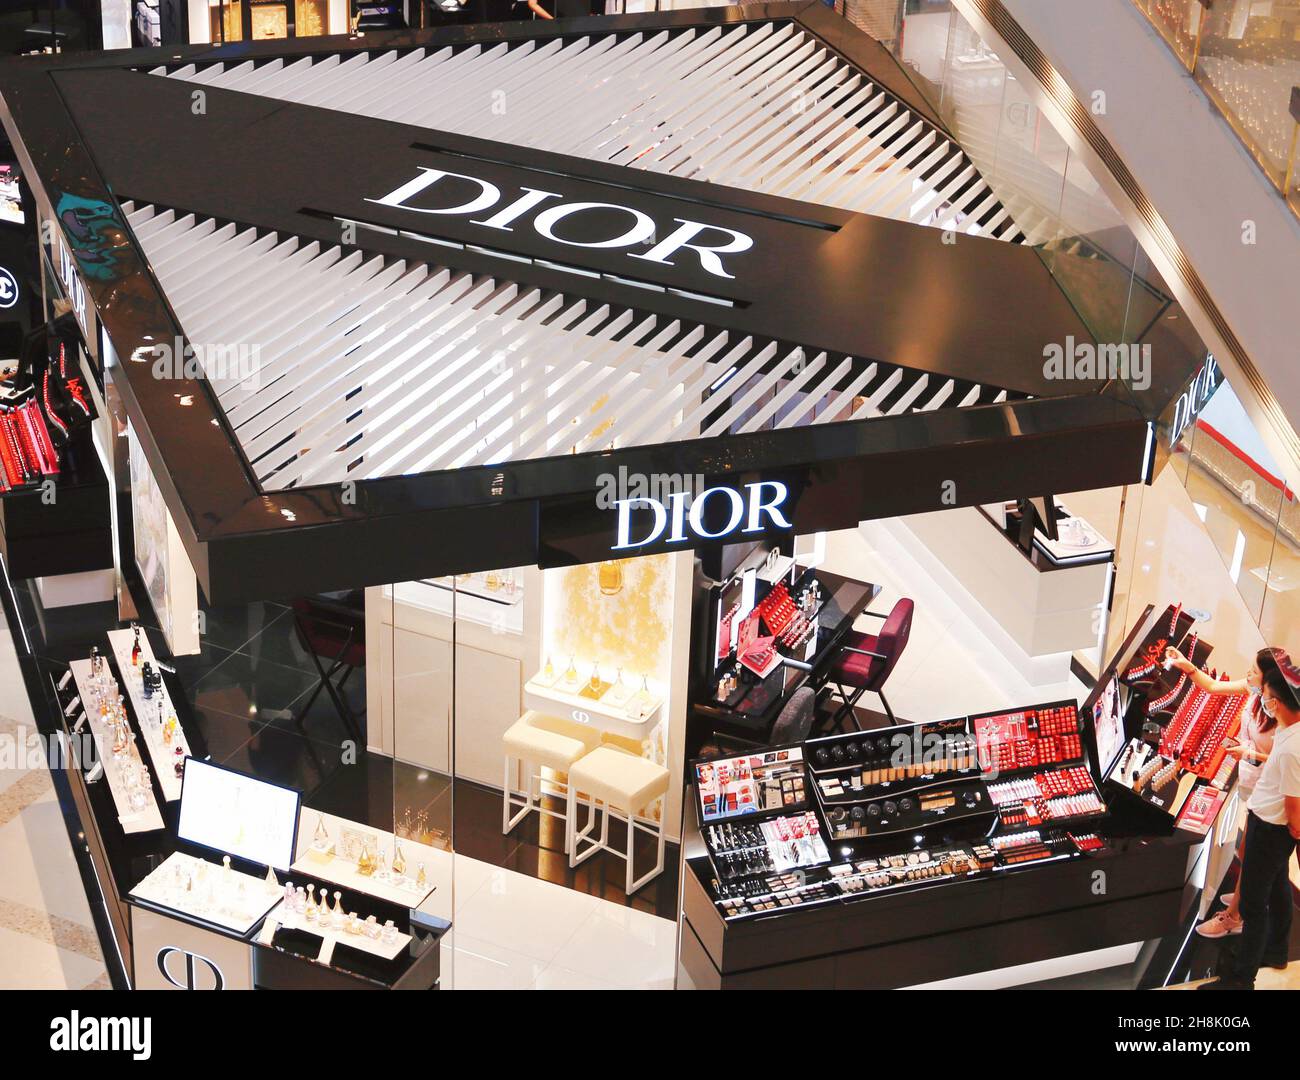 Chinese Photographer Apologizes After Dior Drops Image Criticized As  Pandering To West  HuffPost Voices